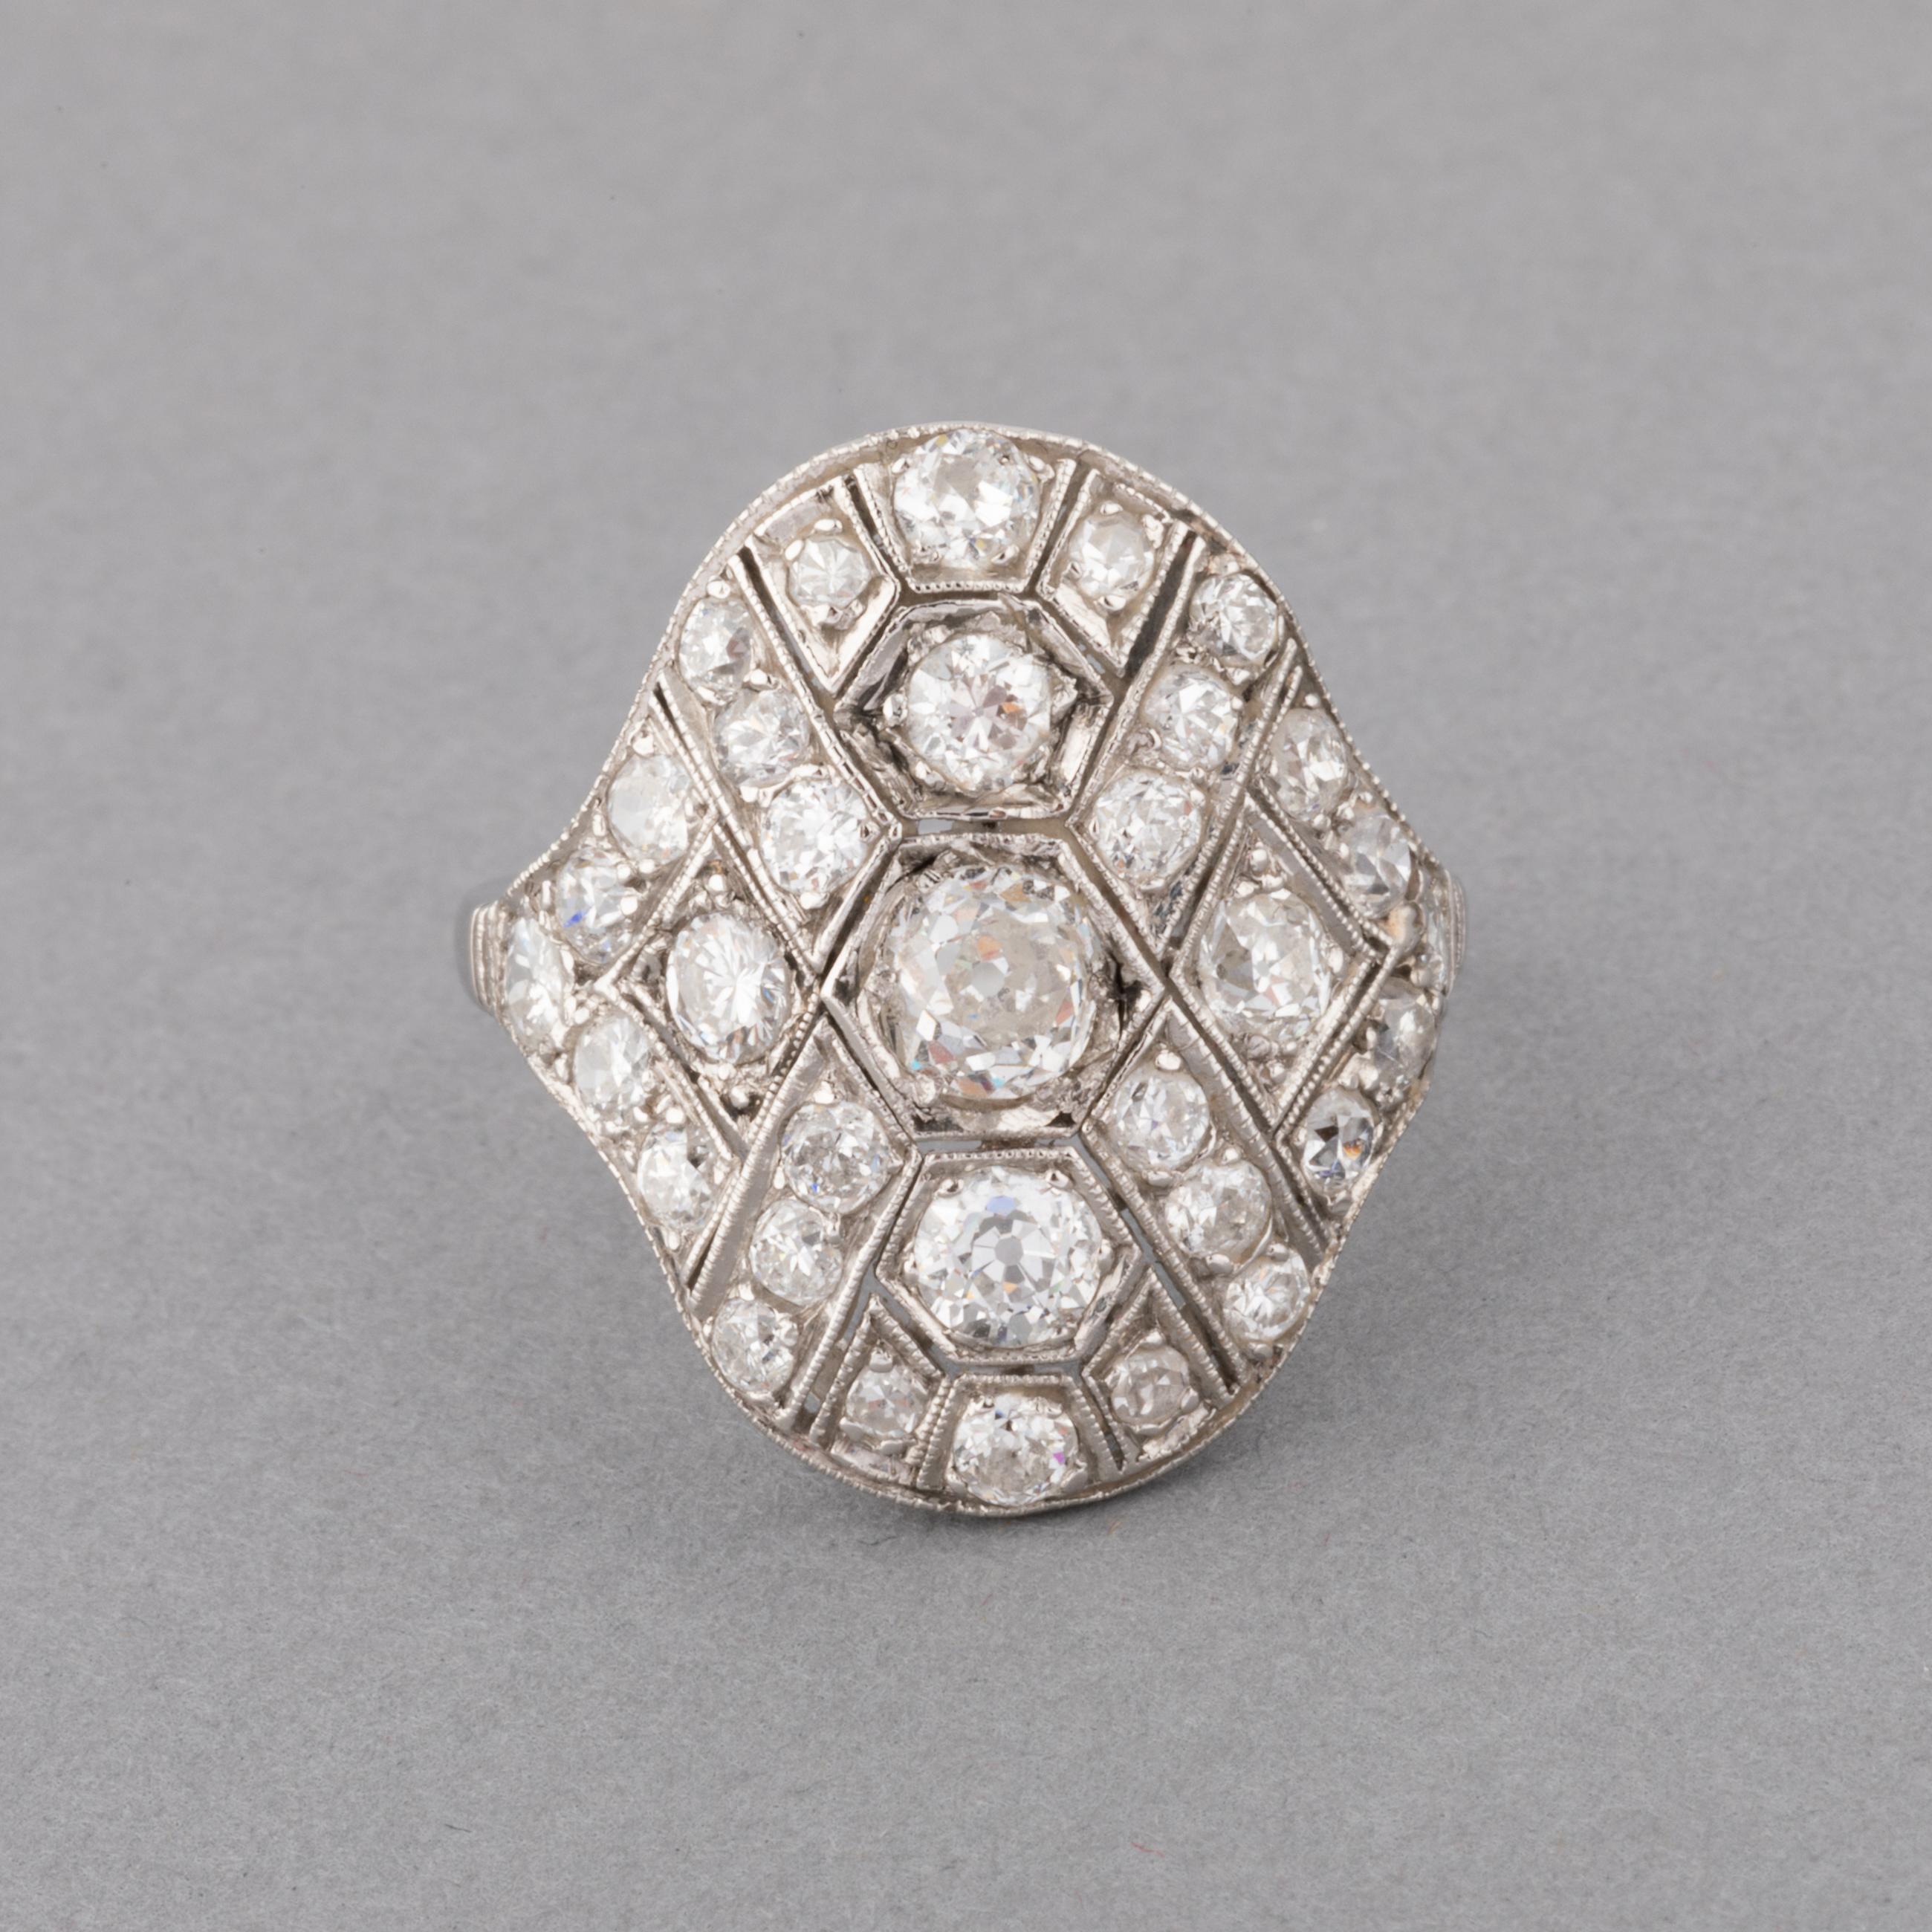 One beautiful ring, made in France circa 1930. Made in white gold 18k.
The diamonds are Old European cut and transitional cut, 2 carts total approximately. They are mostly white color and clear.
Dimension of front: 23 and 20mm.
Ring size: 57 or 8